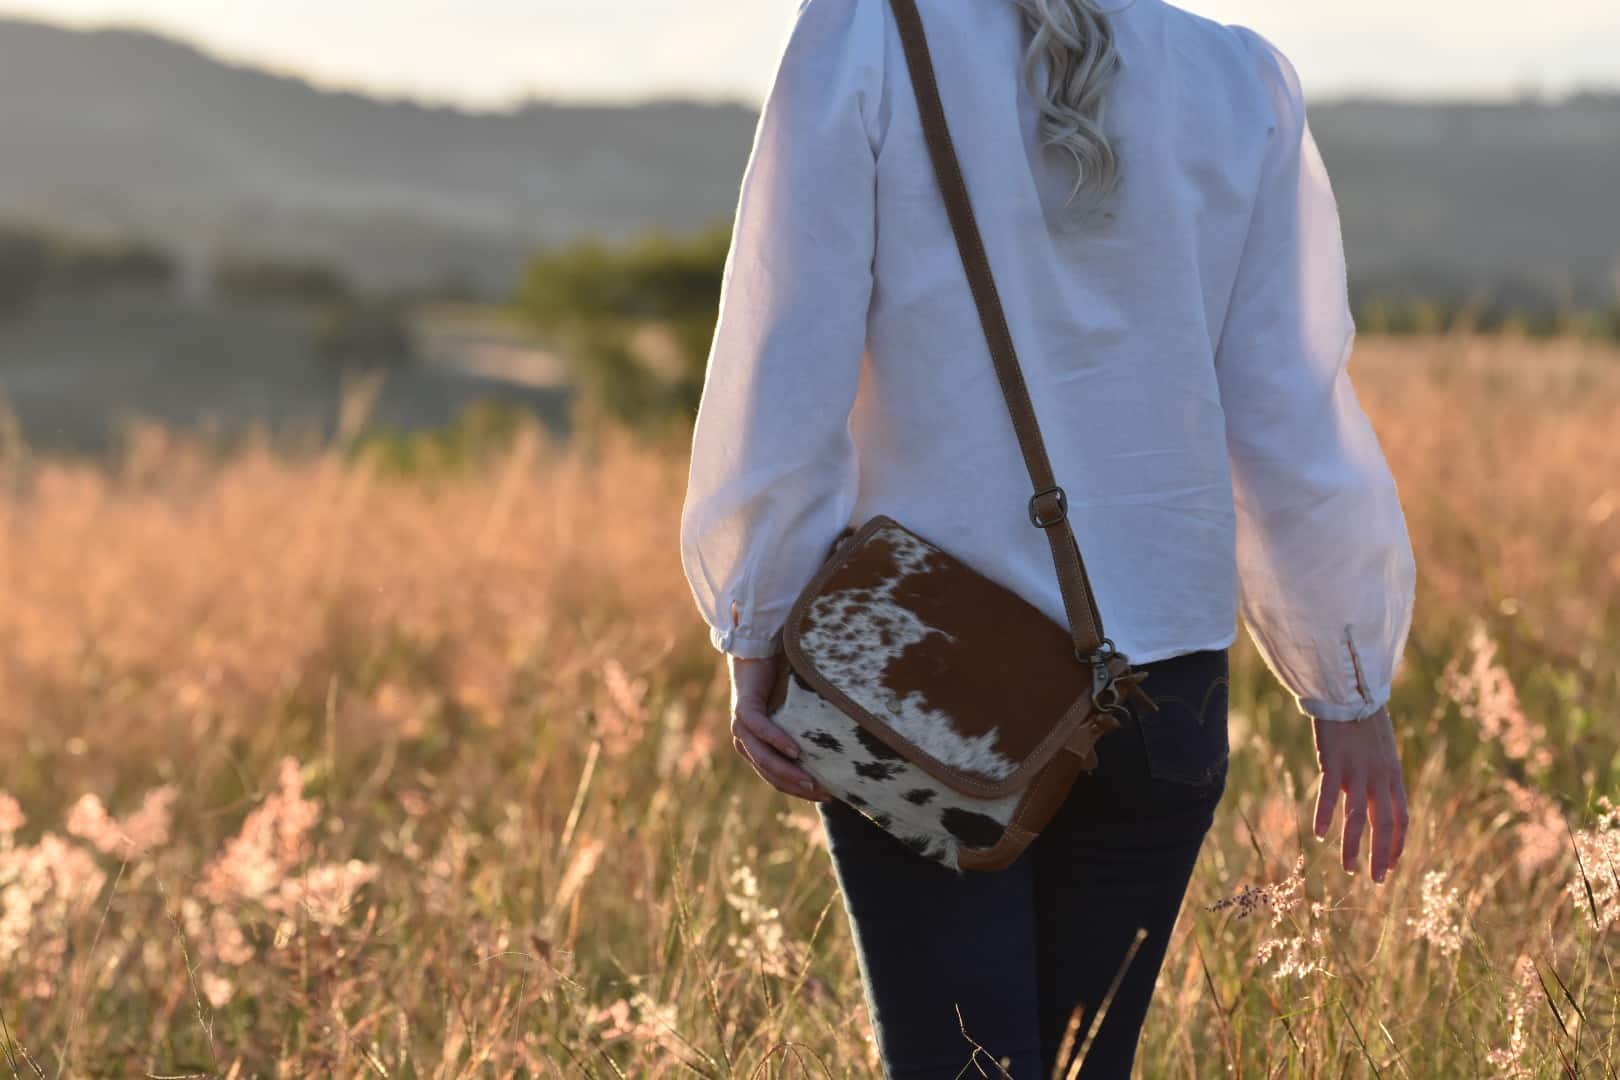 5 unique reasons to buy a Cowhide Leather Bag